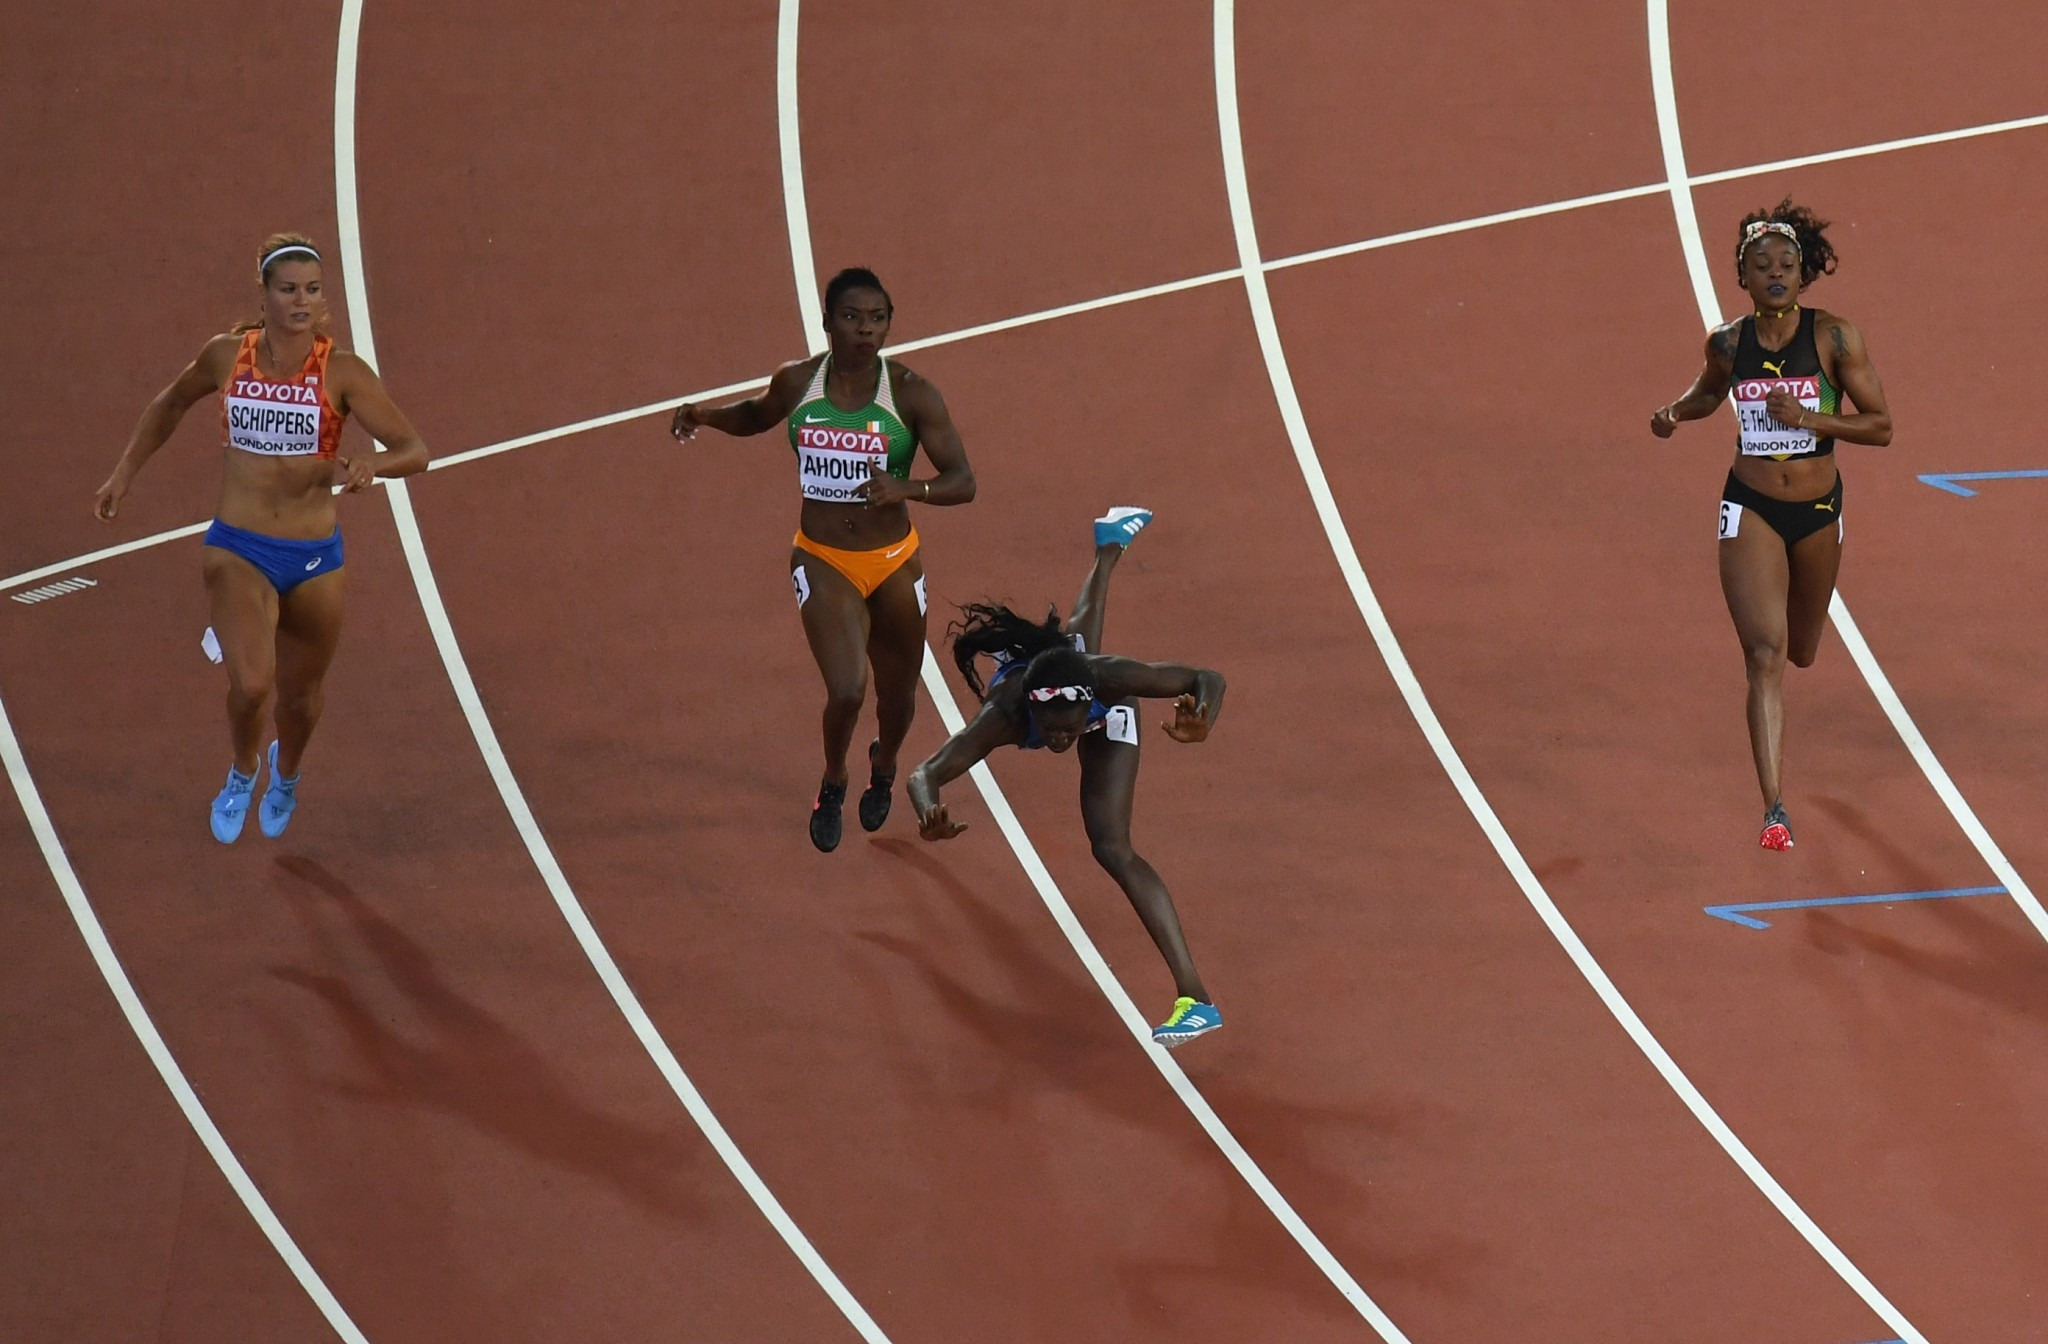 Dive for the line powers Bowie to US 100m double at IAAF World Championships